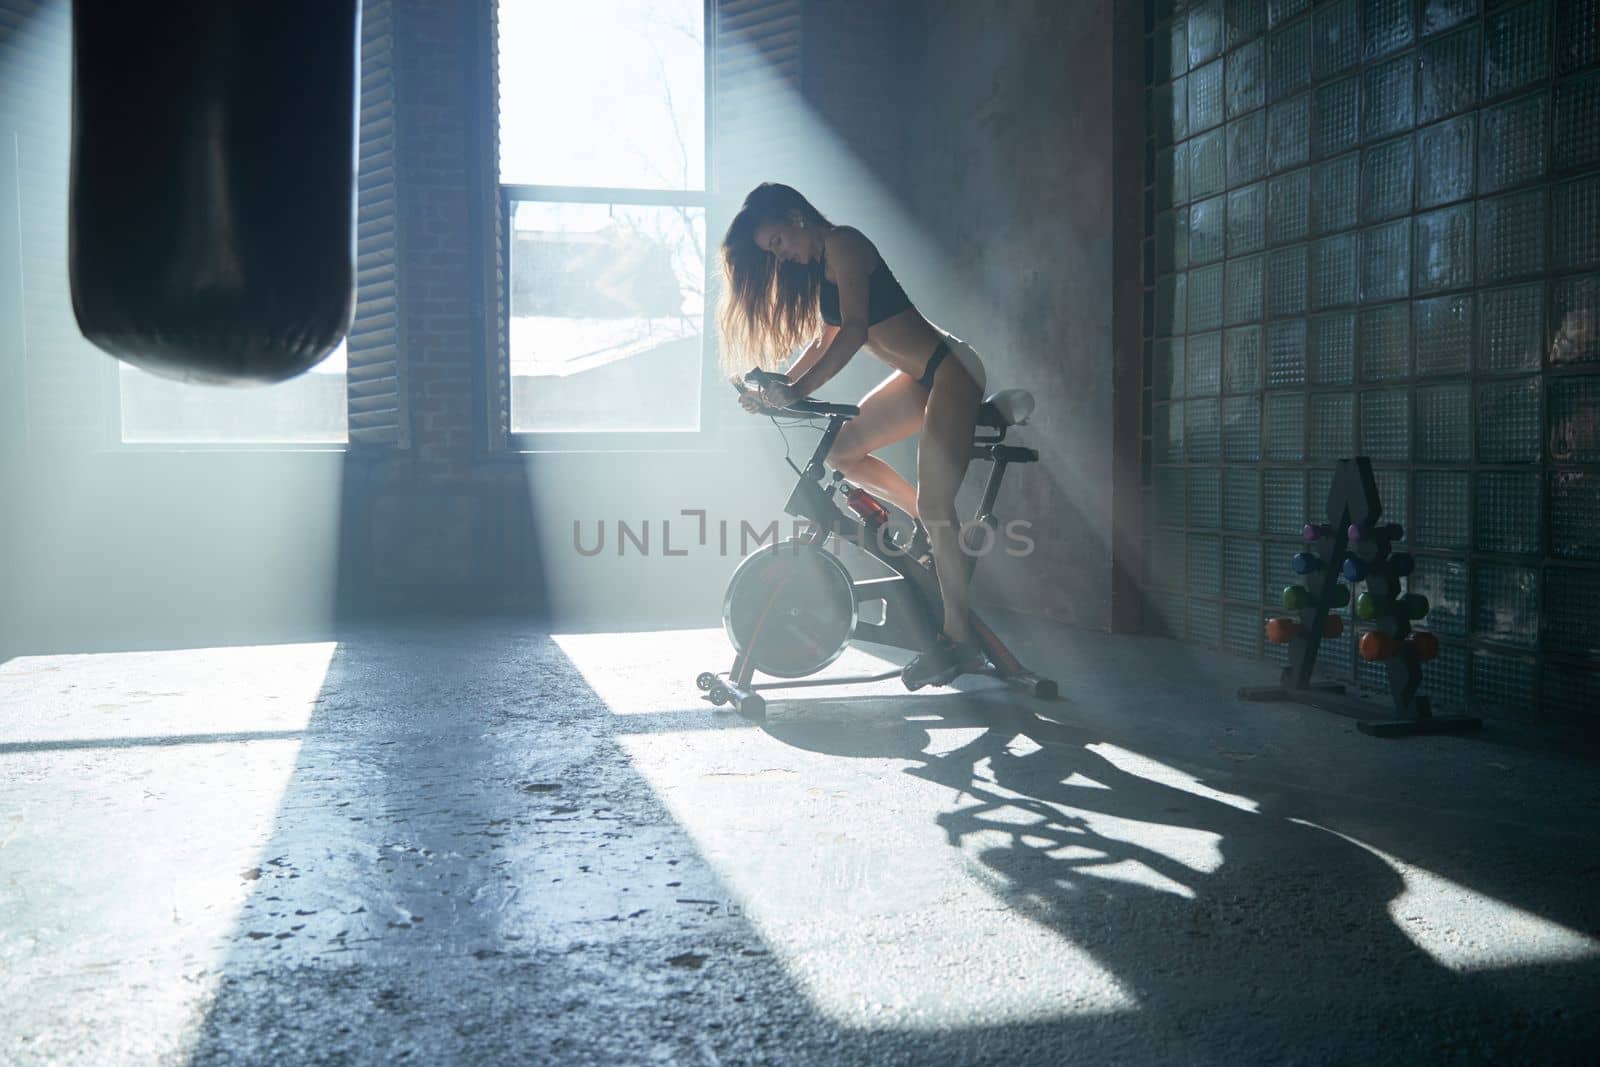 The beautiful fitness girl with a sport body twists bicycle pedals in gym, large loft-style room, beautiful light from windows, sun beams, the stationary exercise machine the bicycle. High quality photo